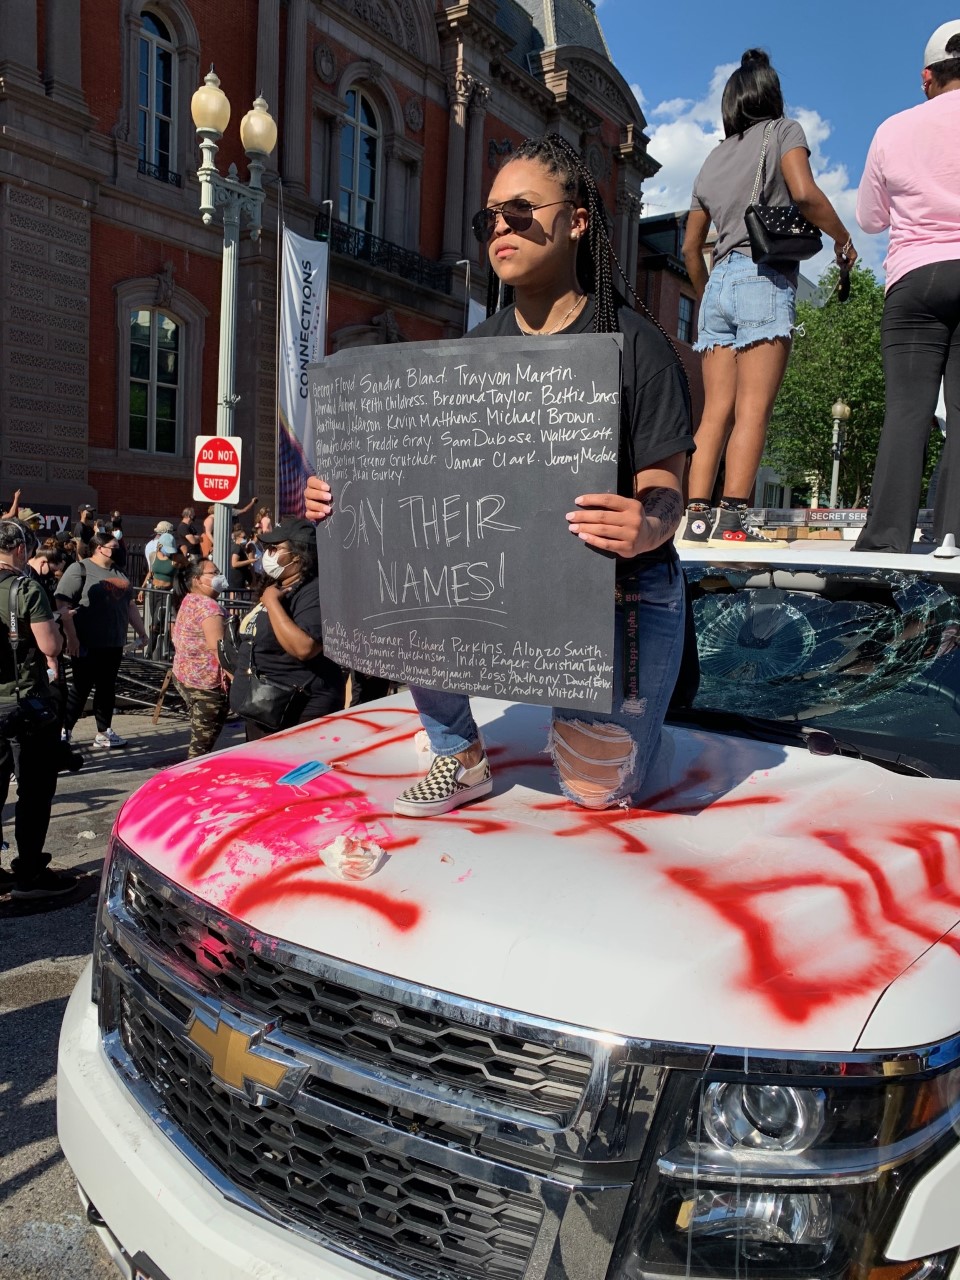 Protesters stand on top of a Secret Service vehicle outside of the White House on May 30, 2020.